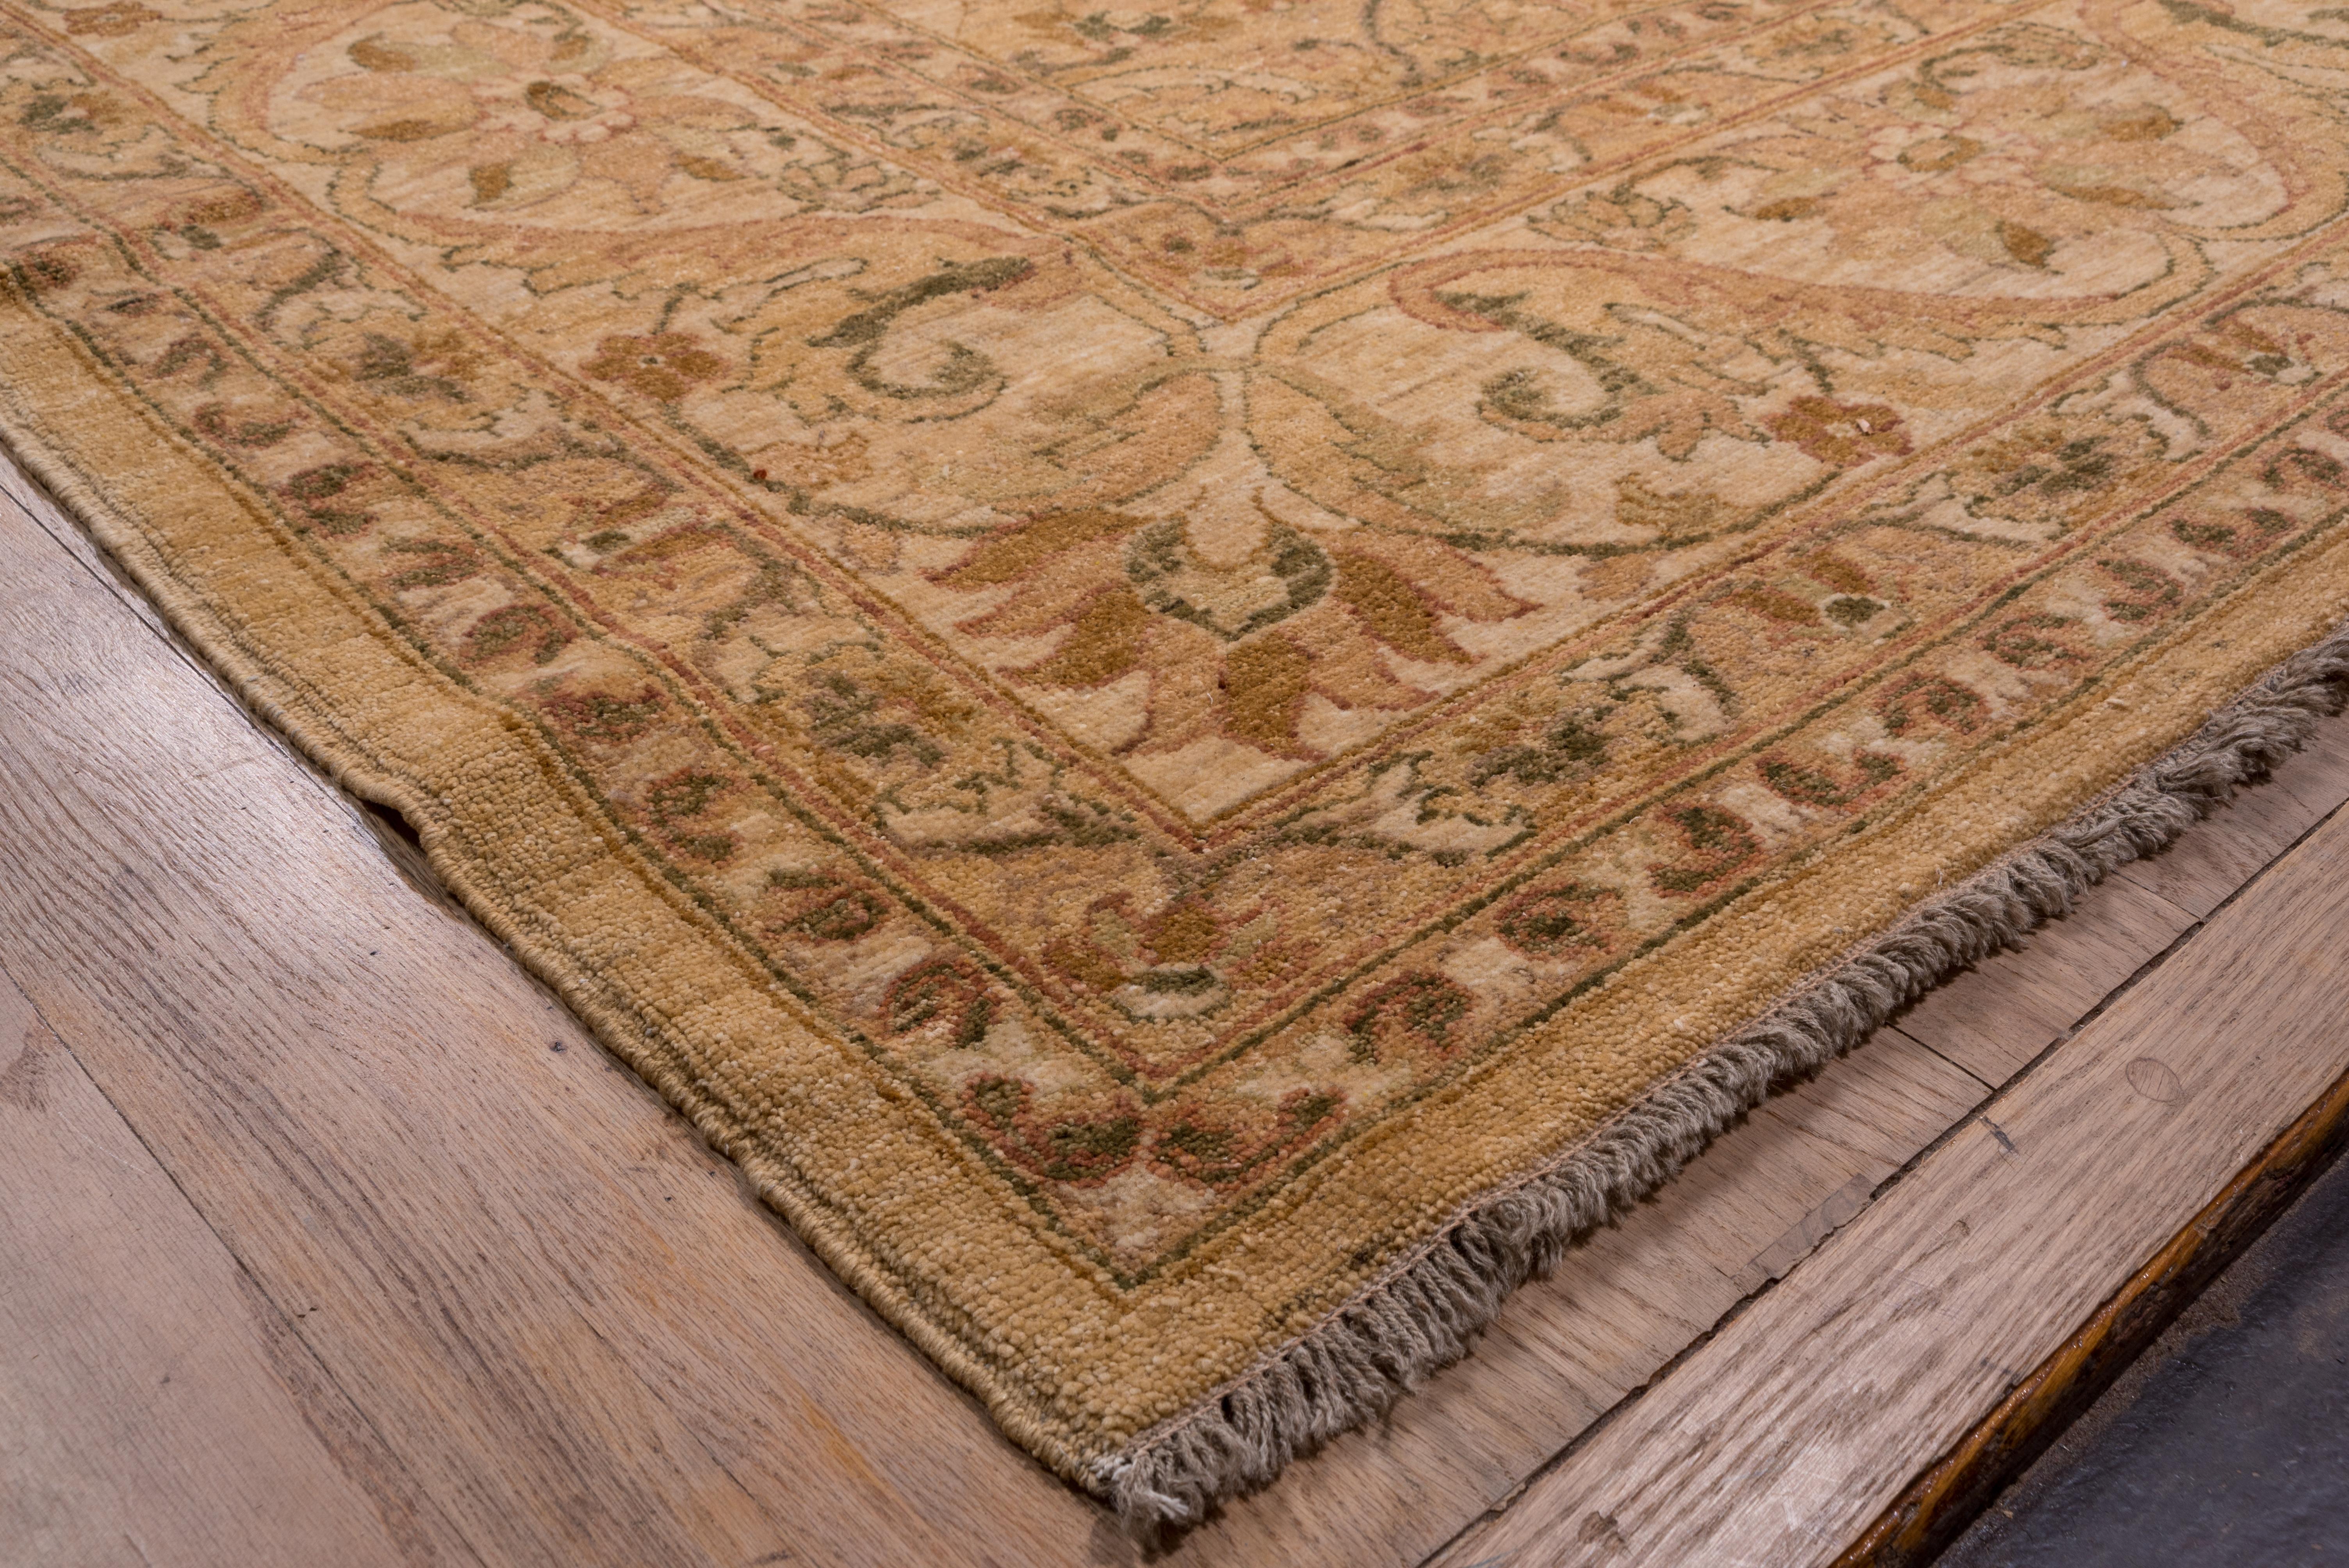 21st Century Indian Amritsar Carpet In Good Condition For Sale In New York, NY